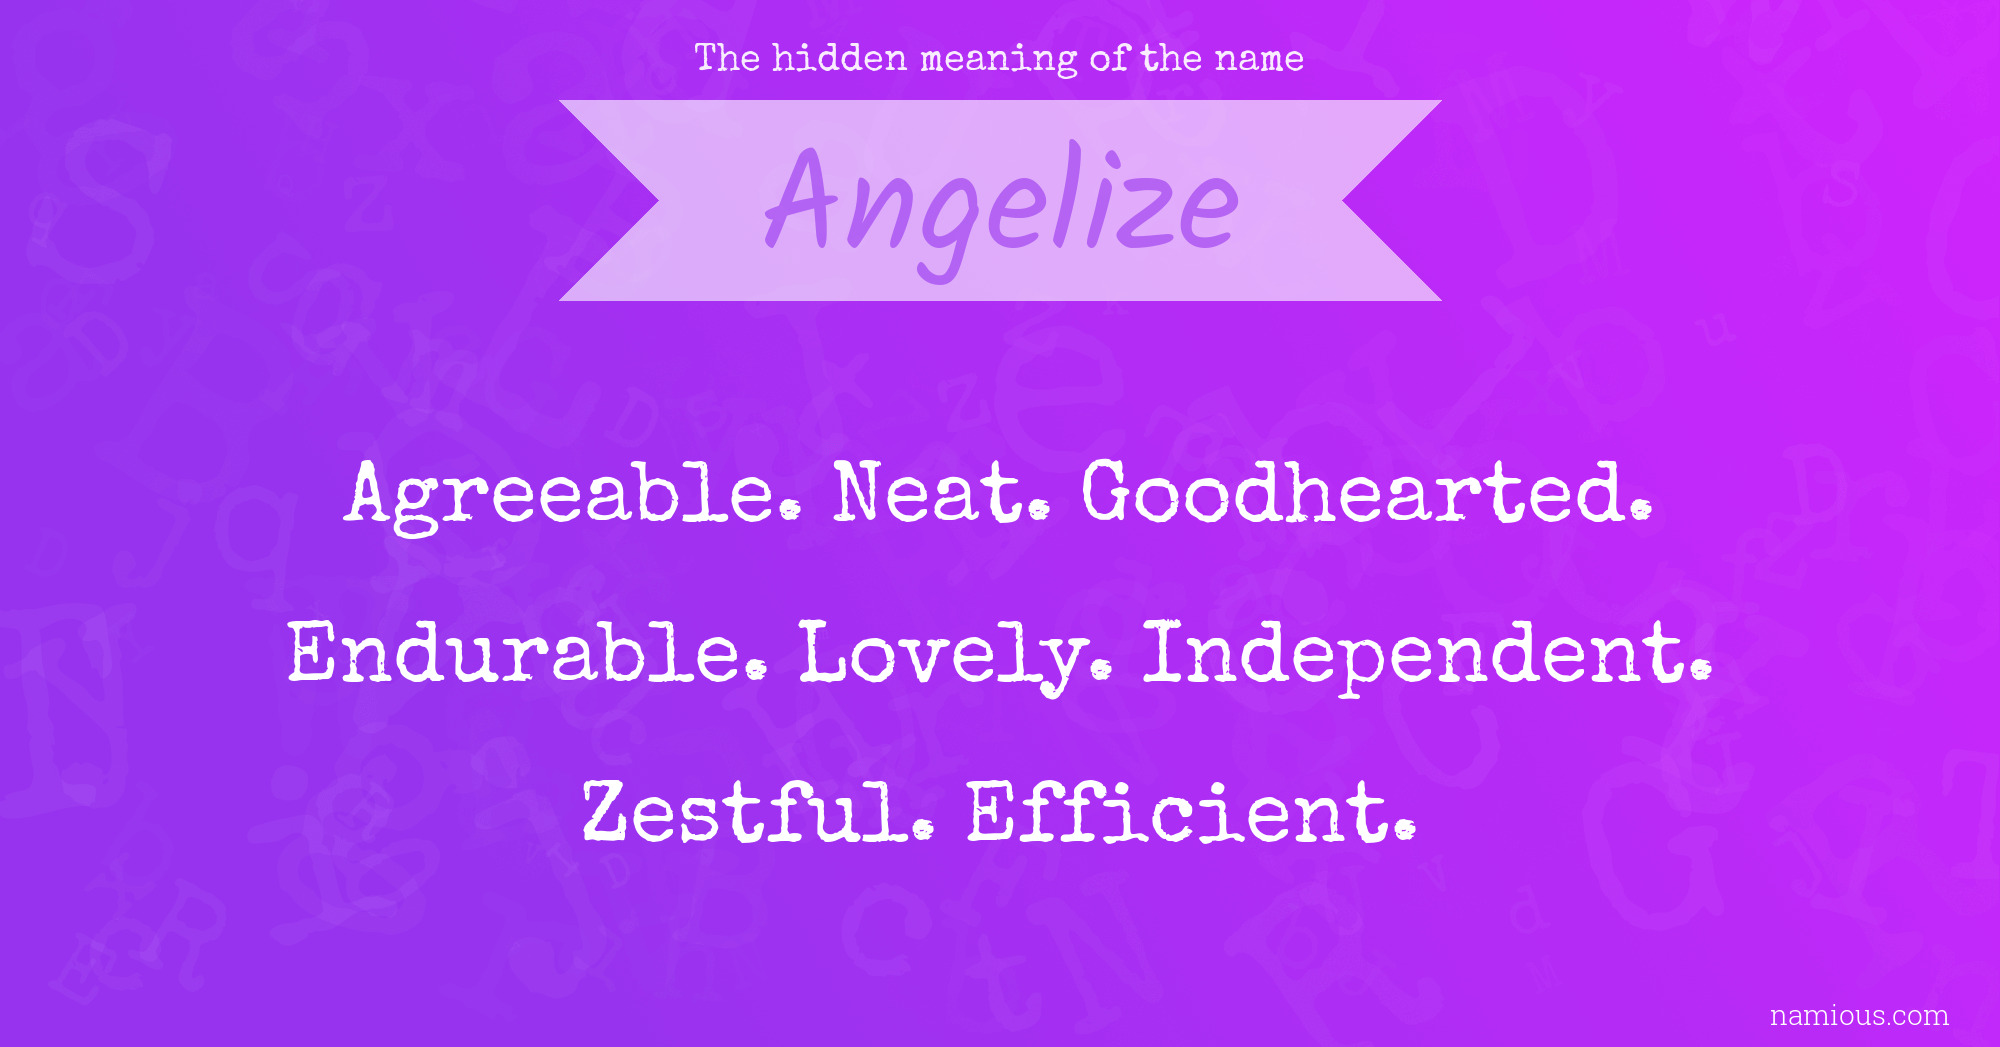 The hidden meaning of the name Angelize